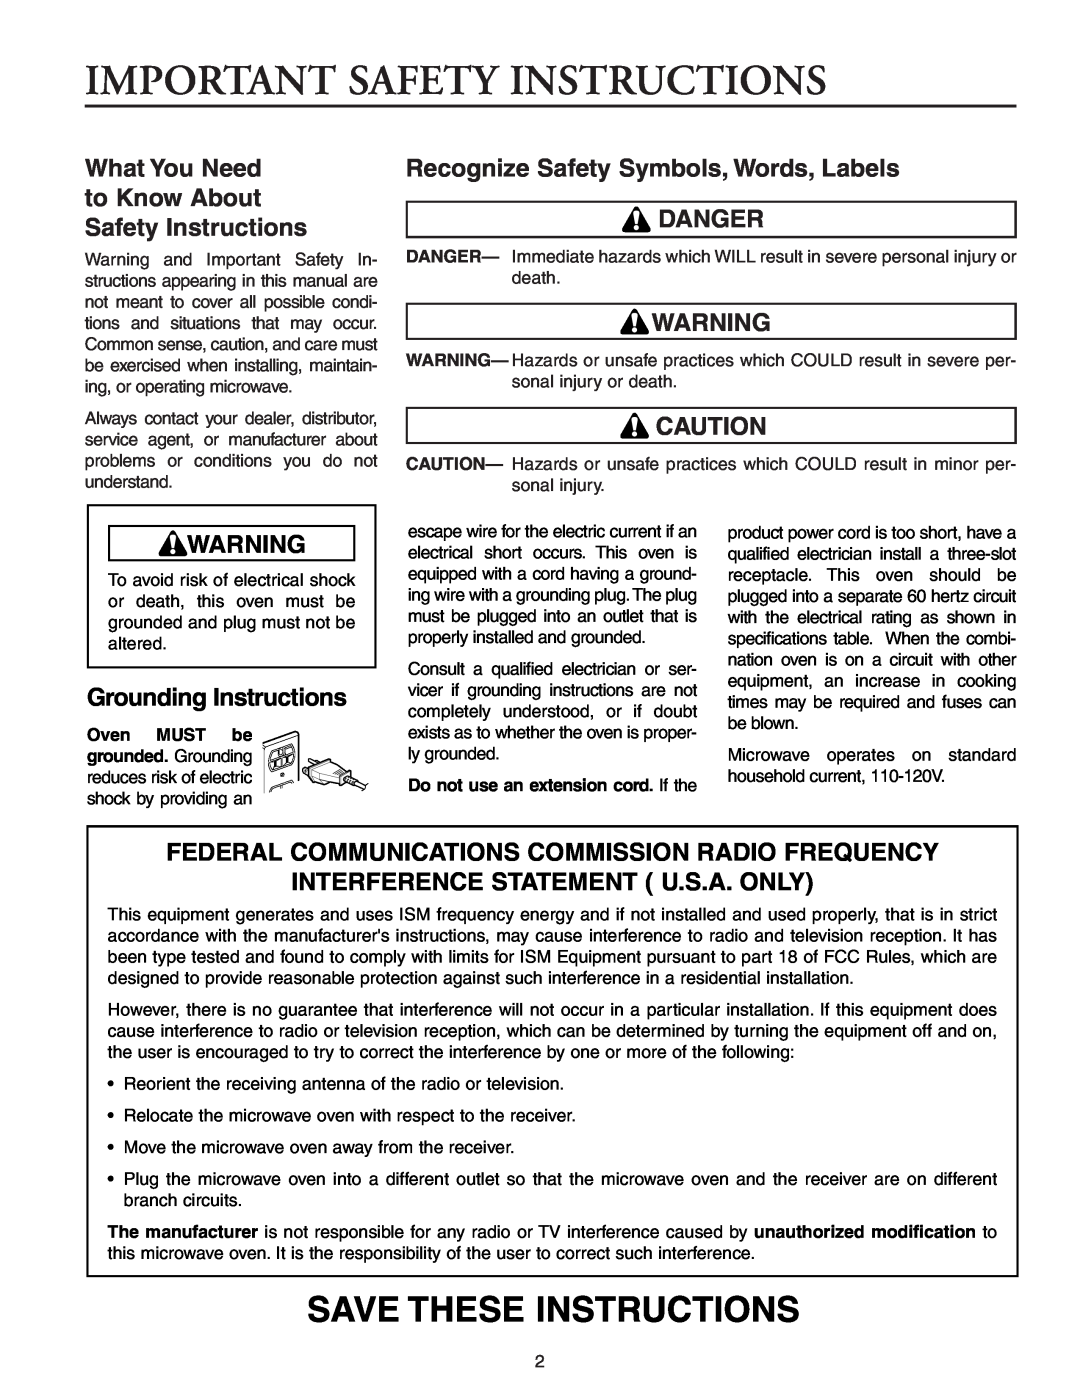 Maytag MMV5156AC Important Safety Instructions, Save These Instructions, Recognize Safety Symbols, Words, Labels DANGER 